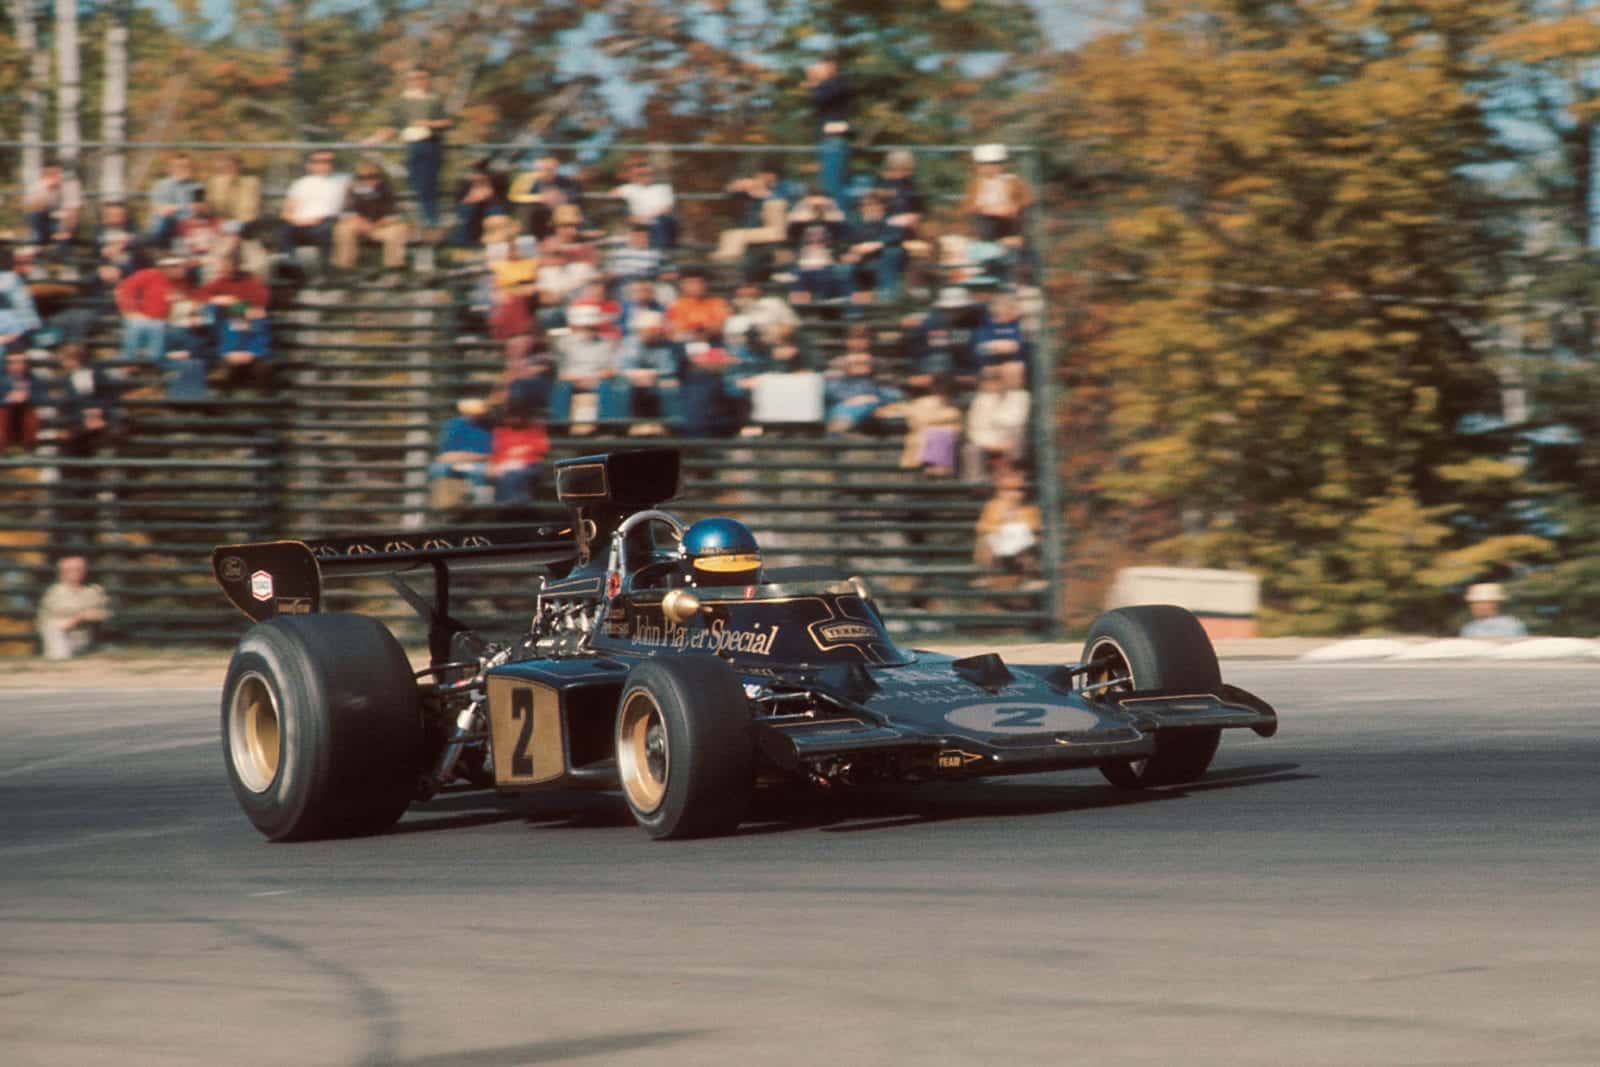 Ronnie Peterson driving the Lotus at Watkins Glen.